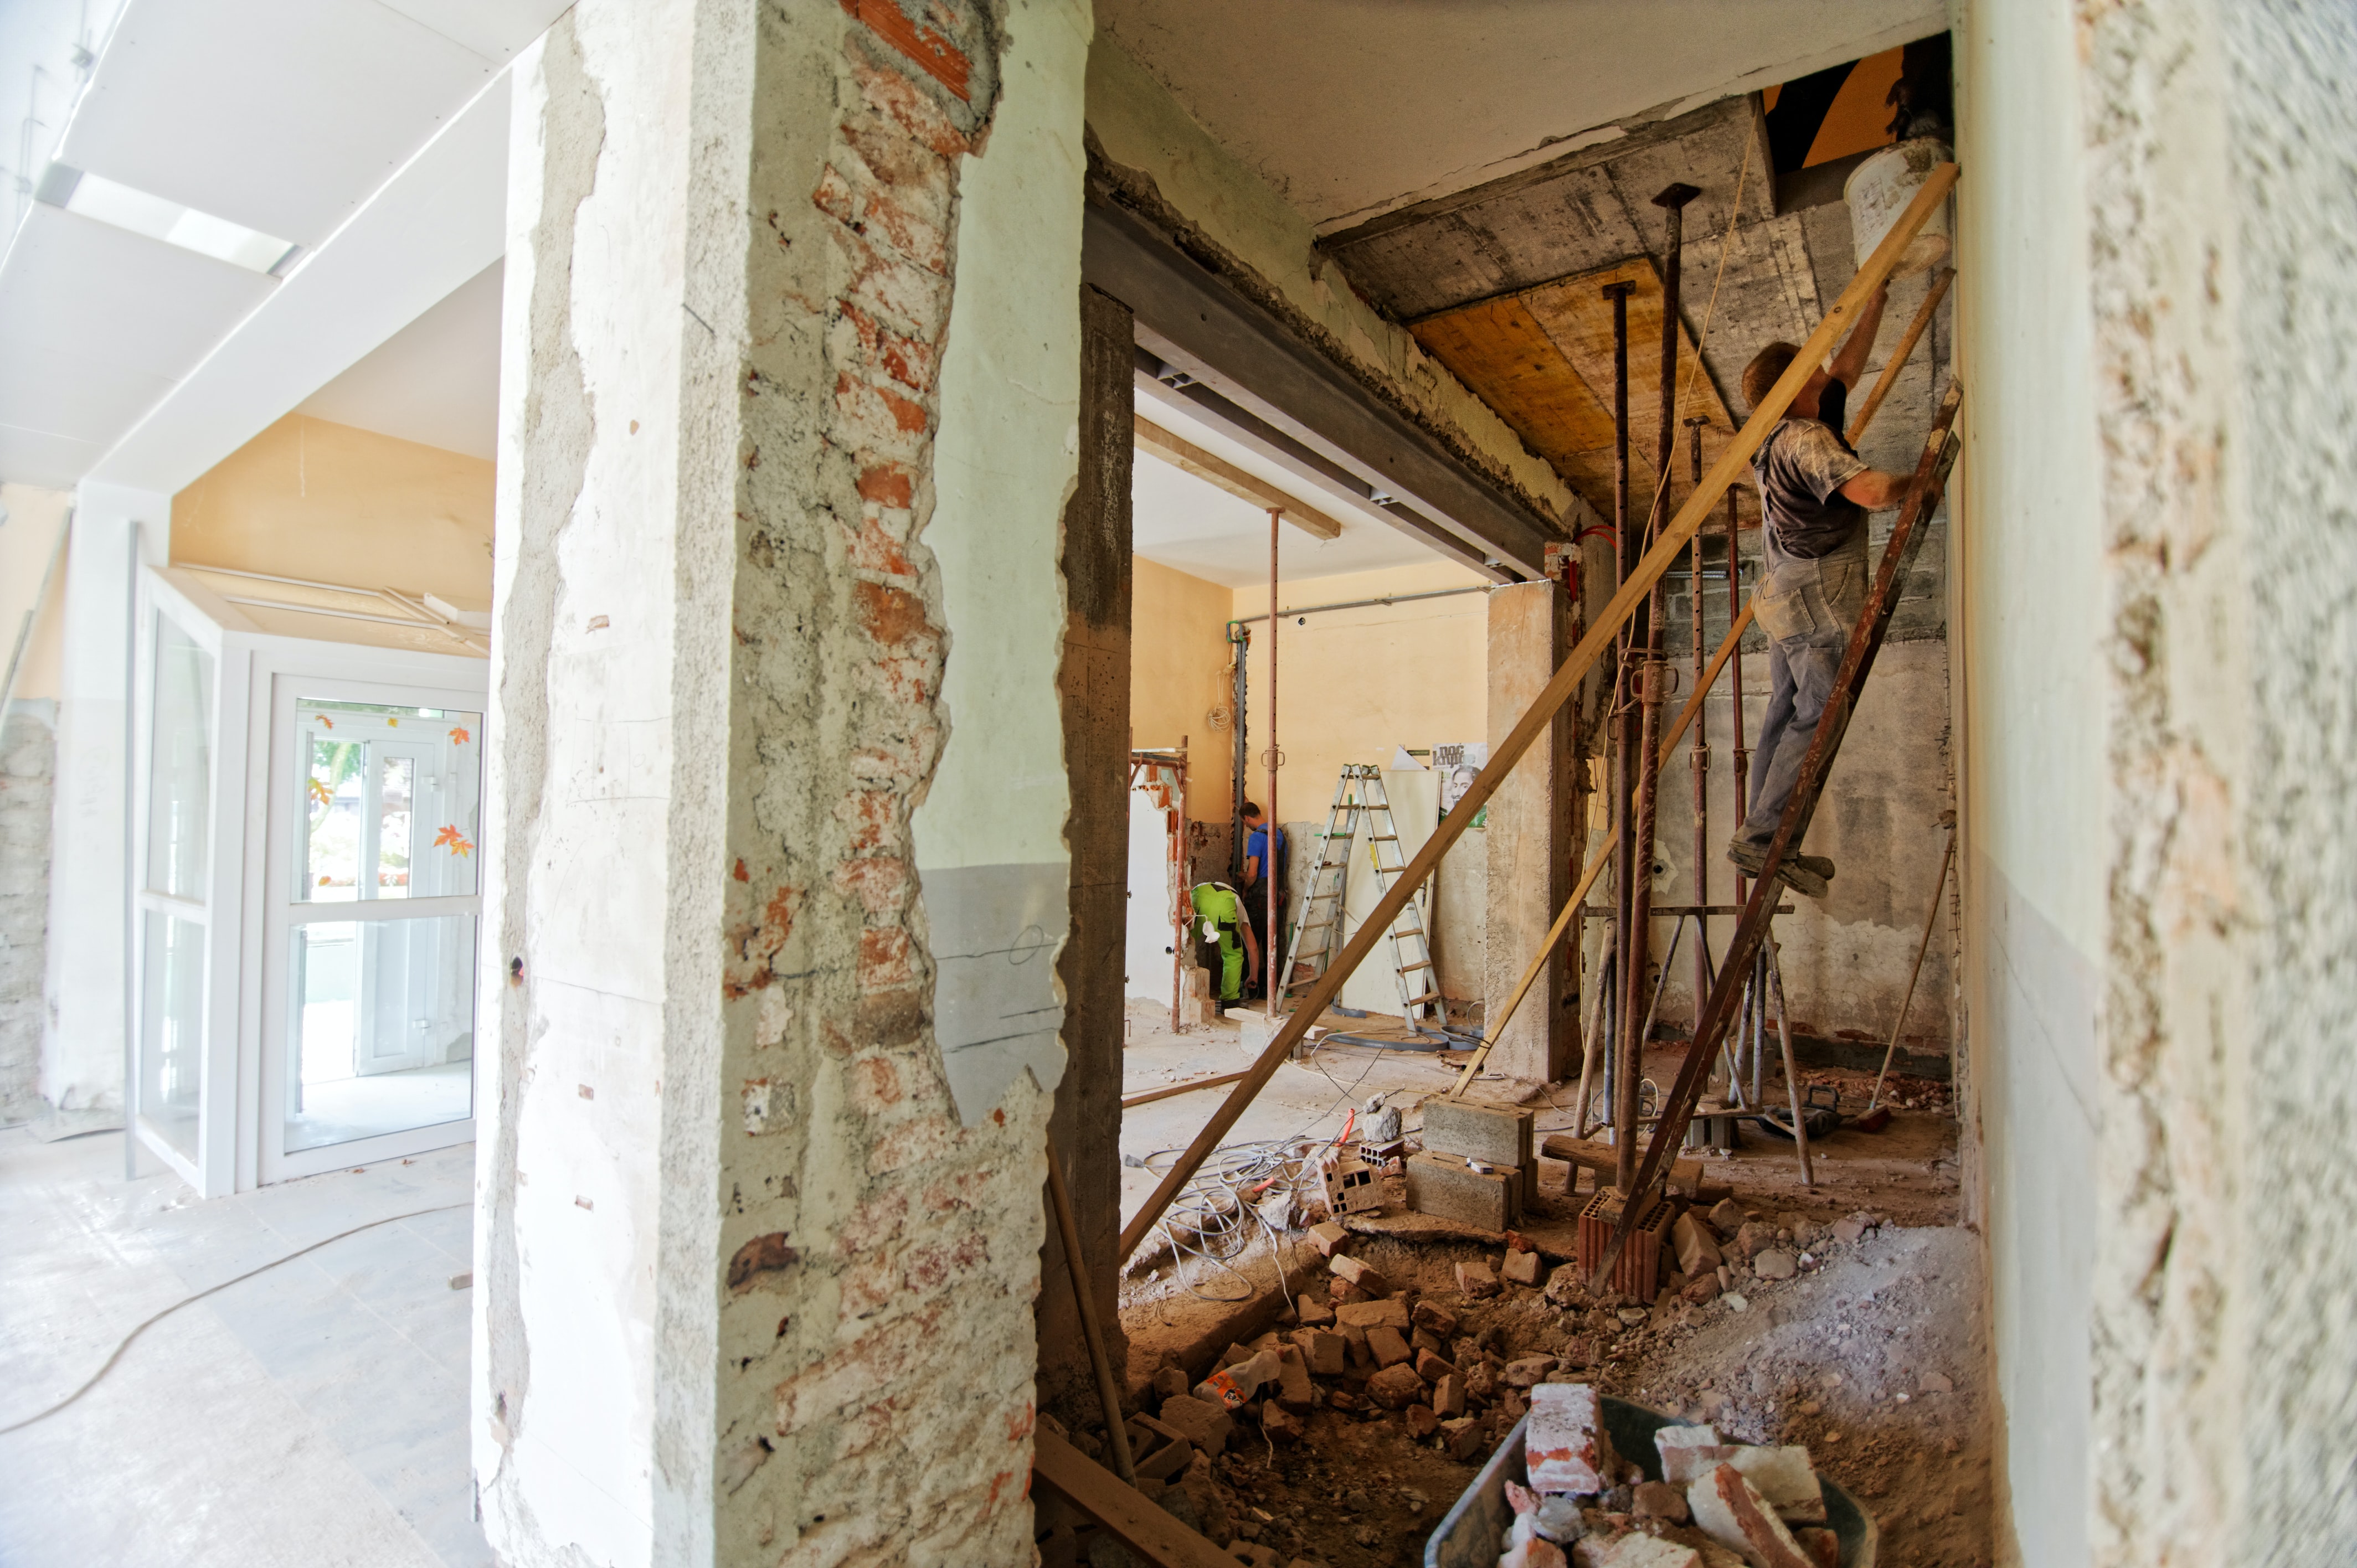 Bathroom Remodel vs. Bathroom Renovation: A Bathroom Remodel generally involves tearing down or construction, while bathroom renovations do not involve construction. In certain cases, professional help may be required to properly remodel your bathroom, depending on the scope and depth of your project.